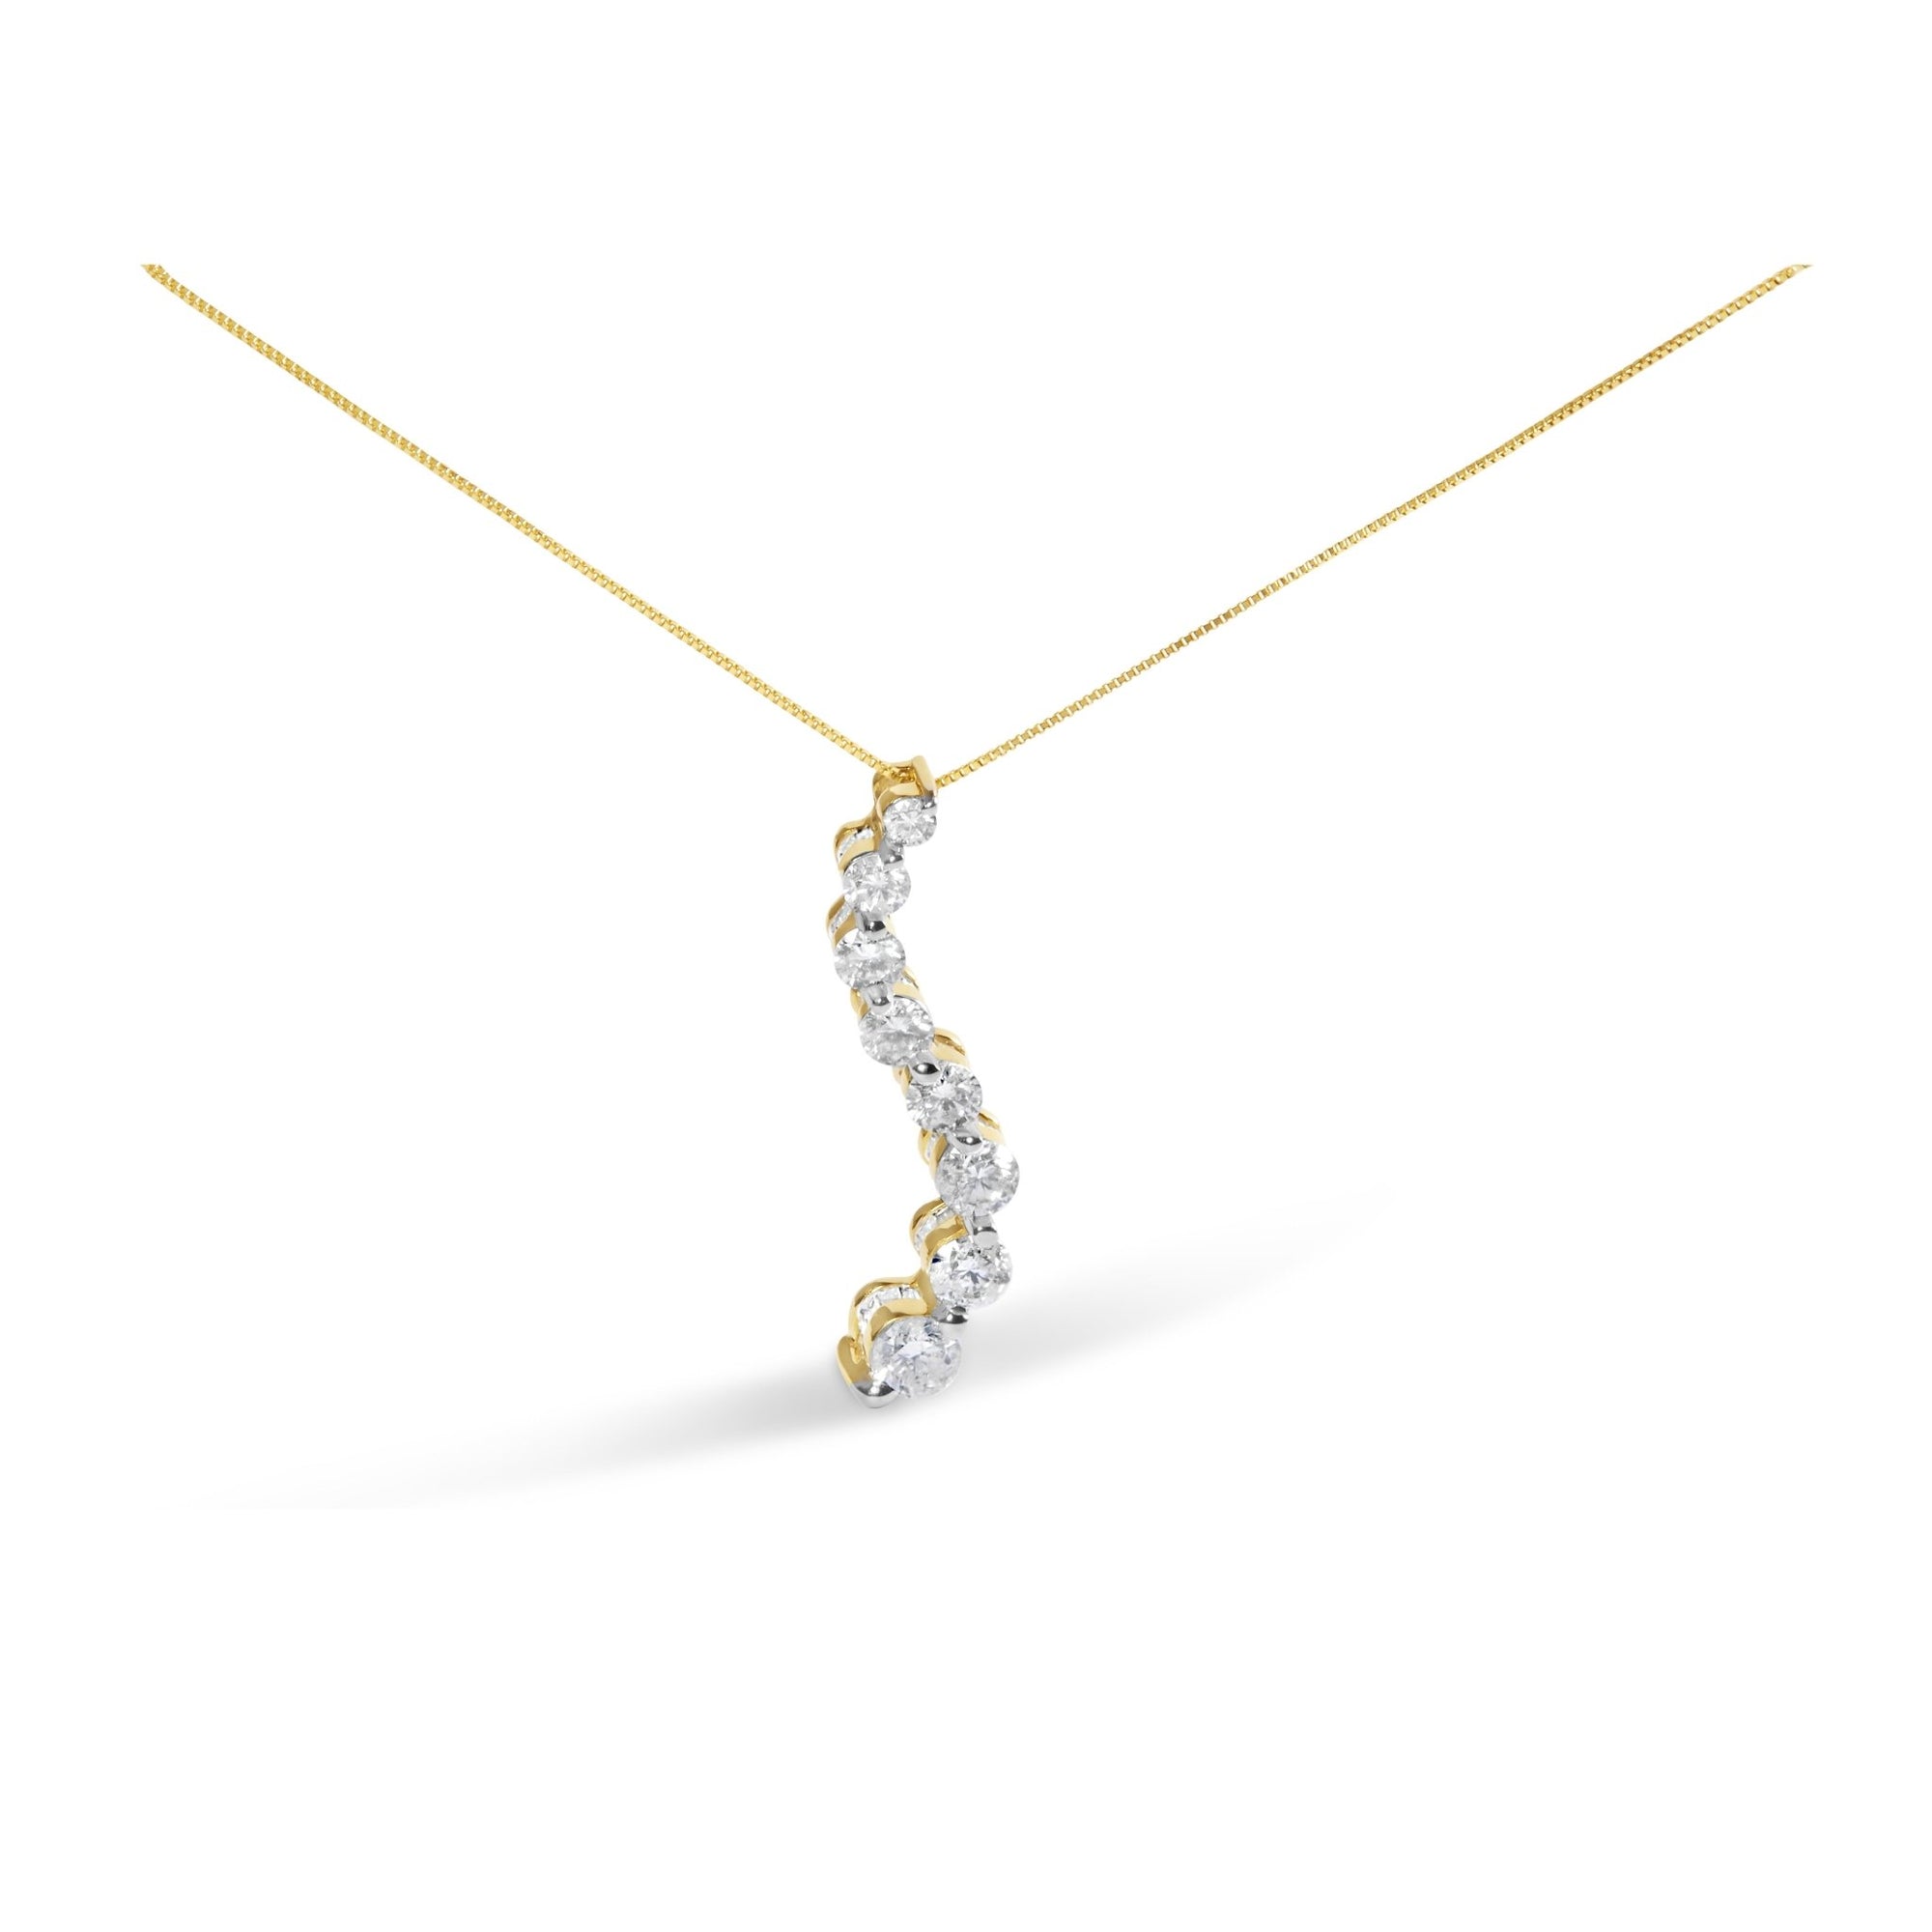 14k Yellow Gold 3.0 cttw Baguette and Brilliant Round-Cut Diamond Journey 18" Pendant Necklace (I-J Color, I2-I3 Clarity) - LinkagejewelrydesignLinkagejewelrydesign